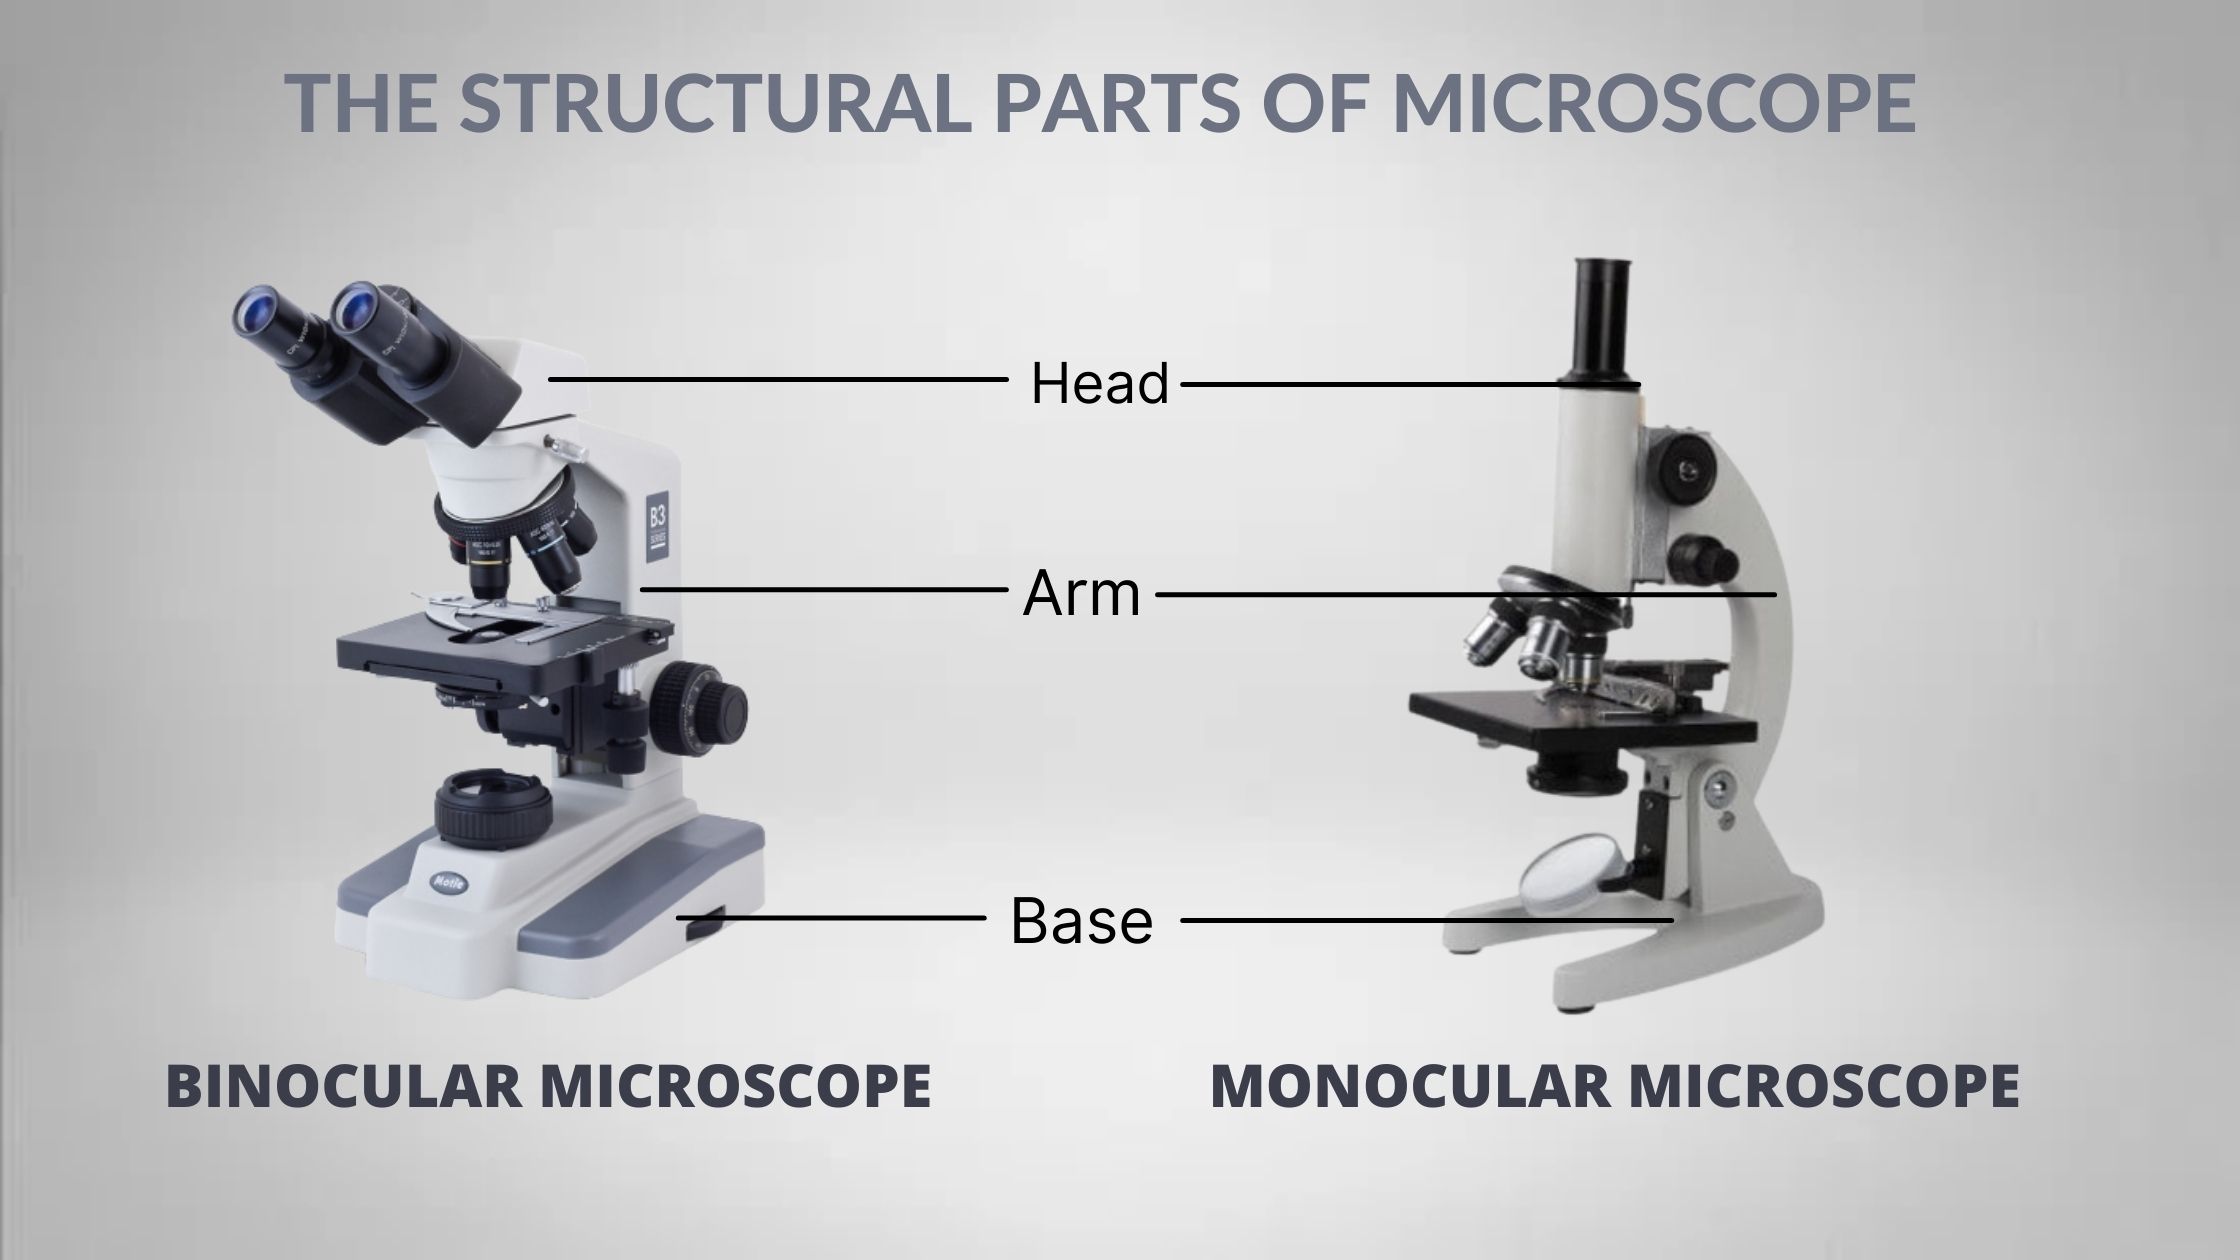 The structural parts of Microscope